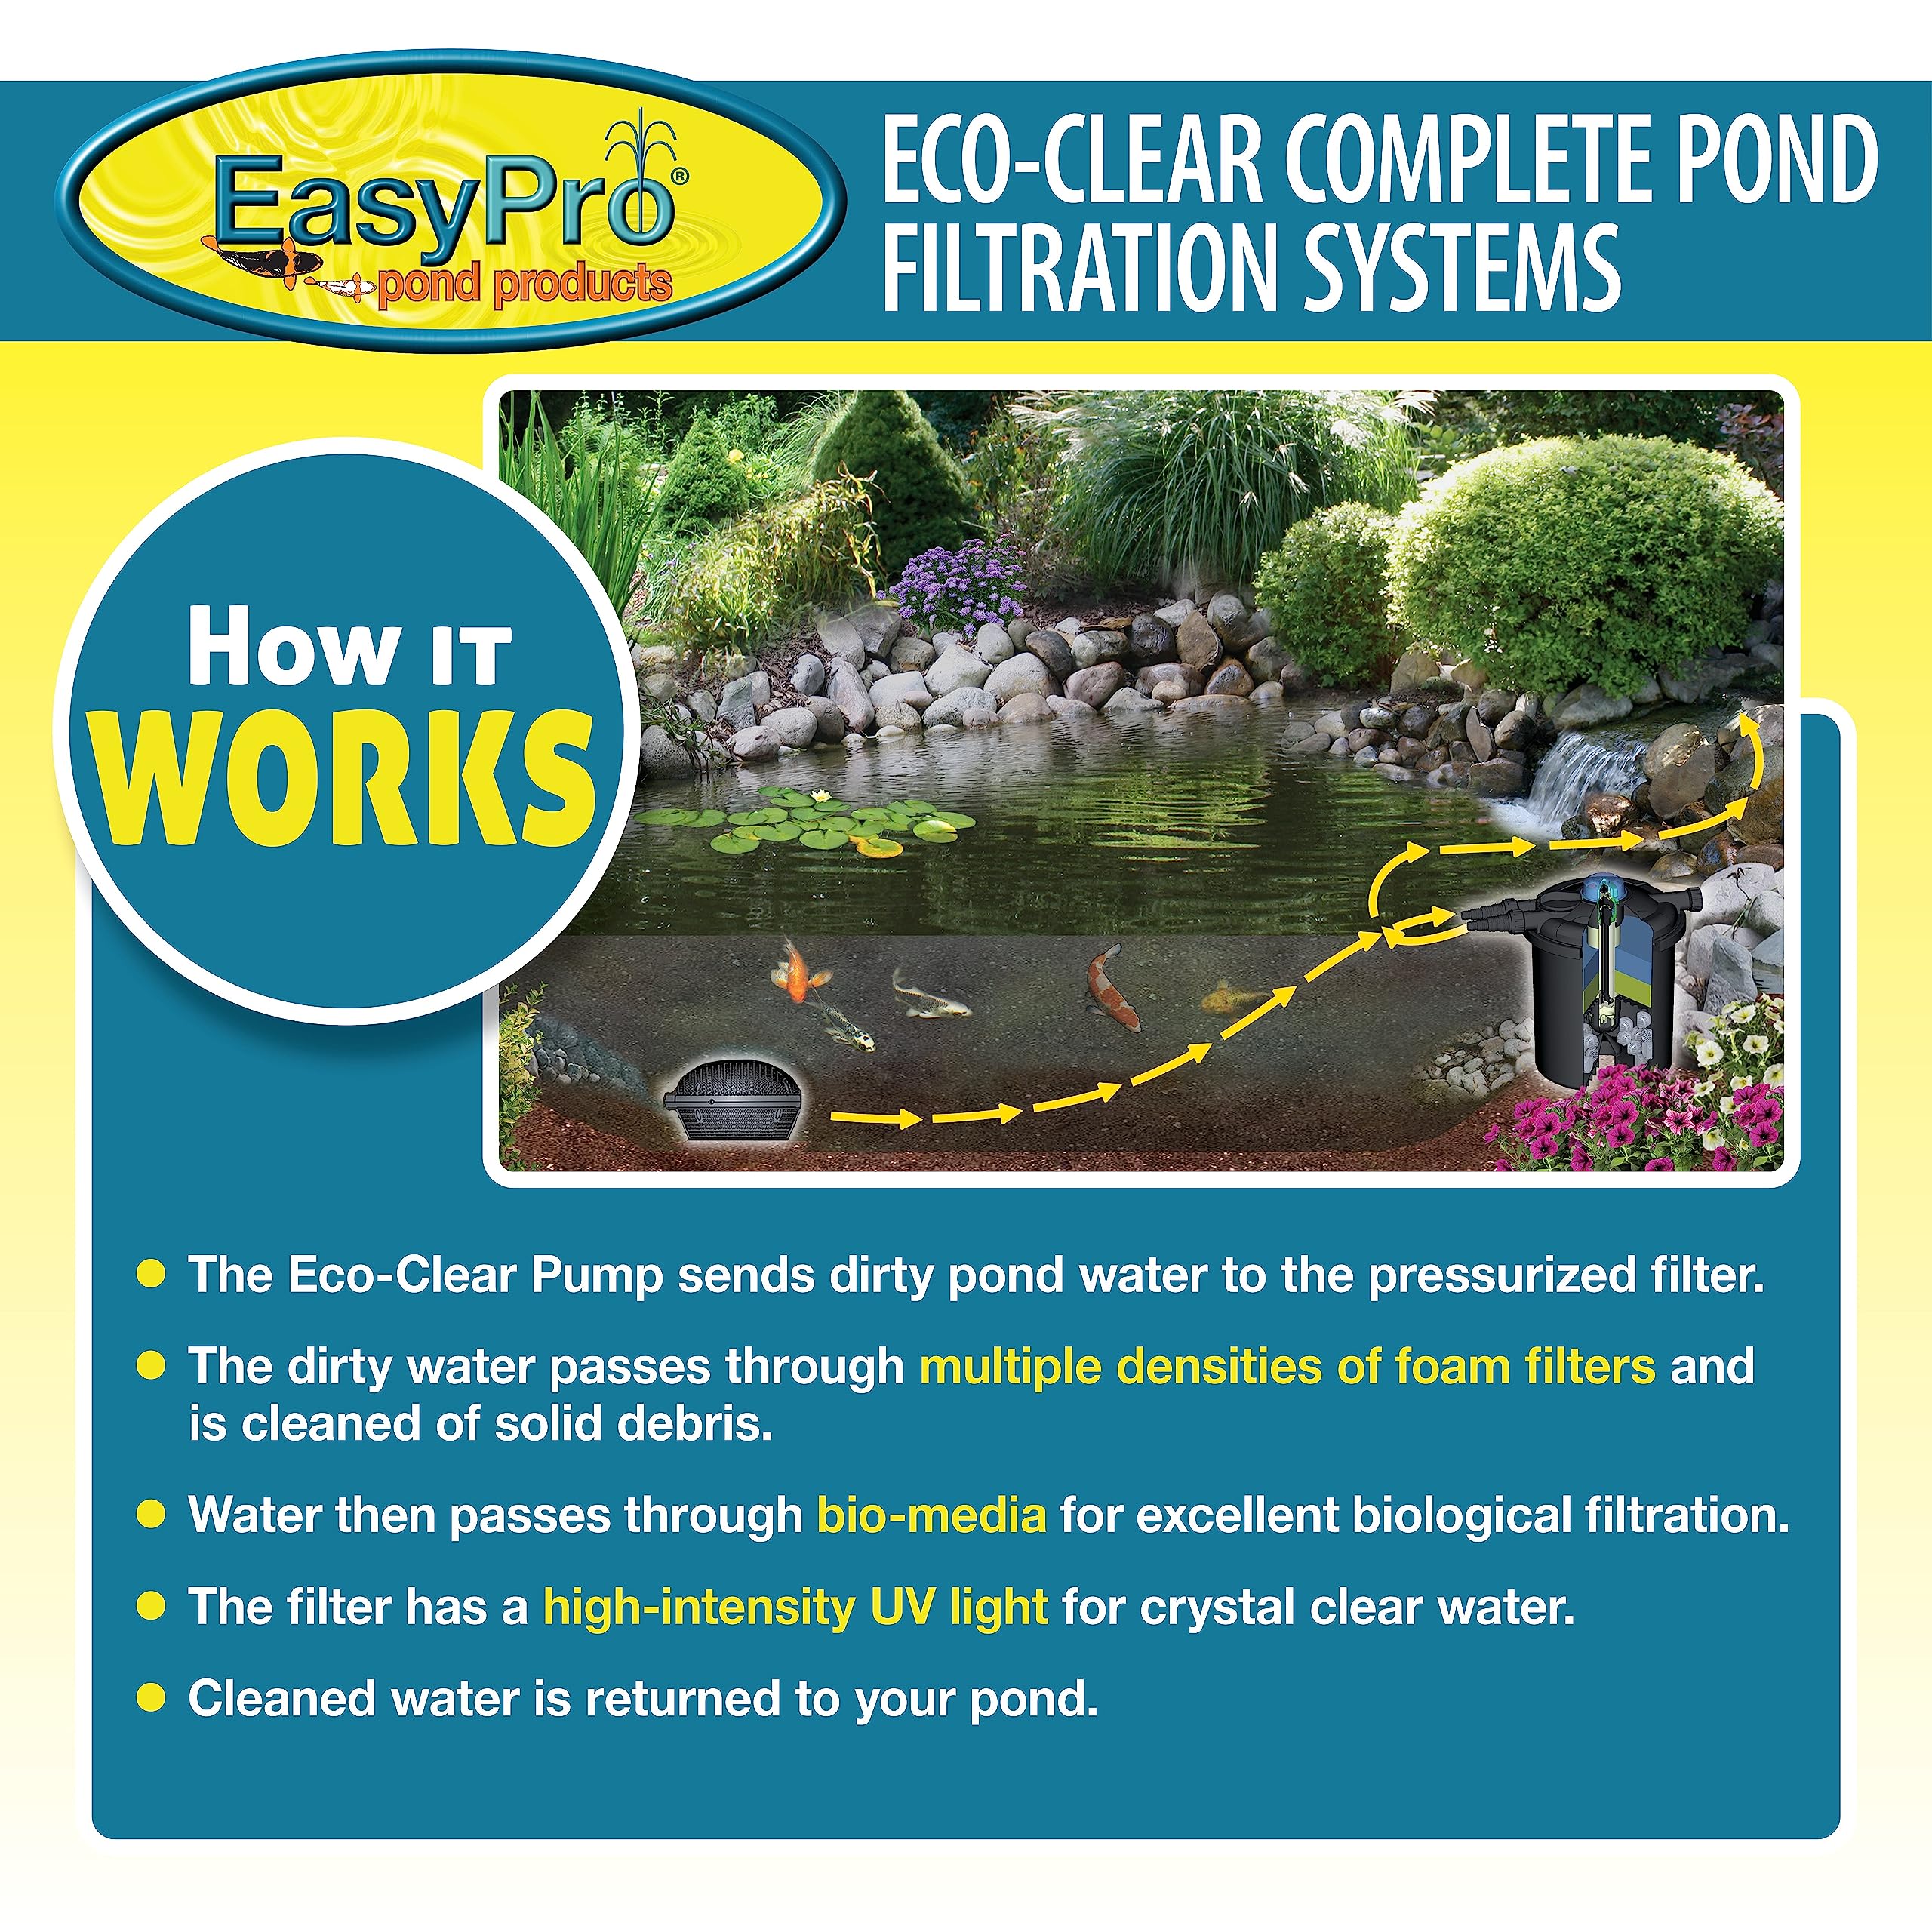 EasyPro ECK39U Eco-Clear Complete Pond Filtration System | Contains EC3900U Filter | EPS2500 Eco-Clear Submersible Pump | 25 feet of 1 1/4″ kink-free tubing | 4 clamps | For ponds up to 3900 Gallons